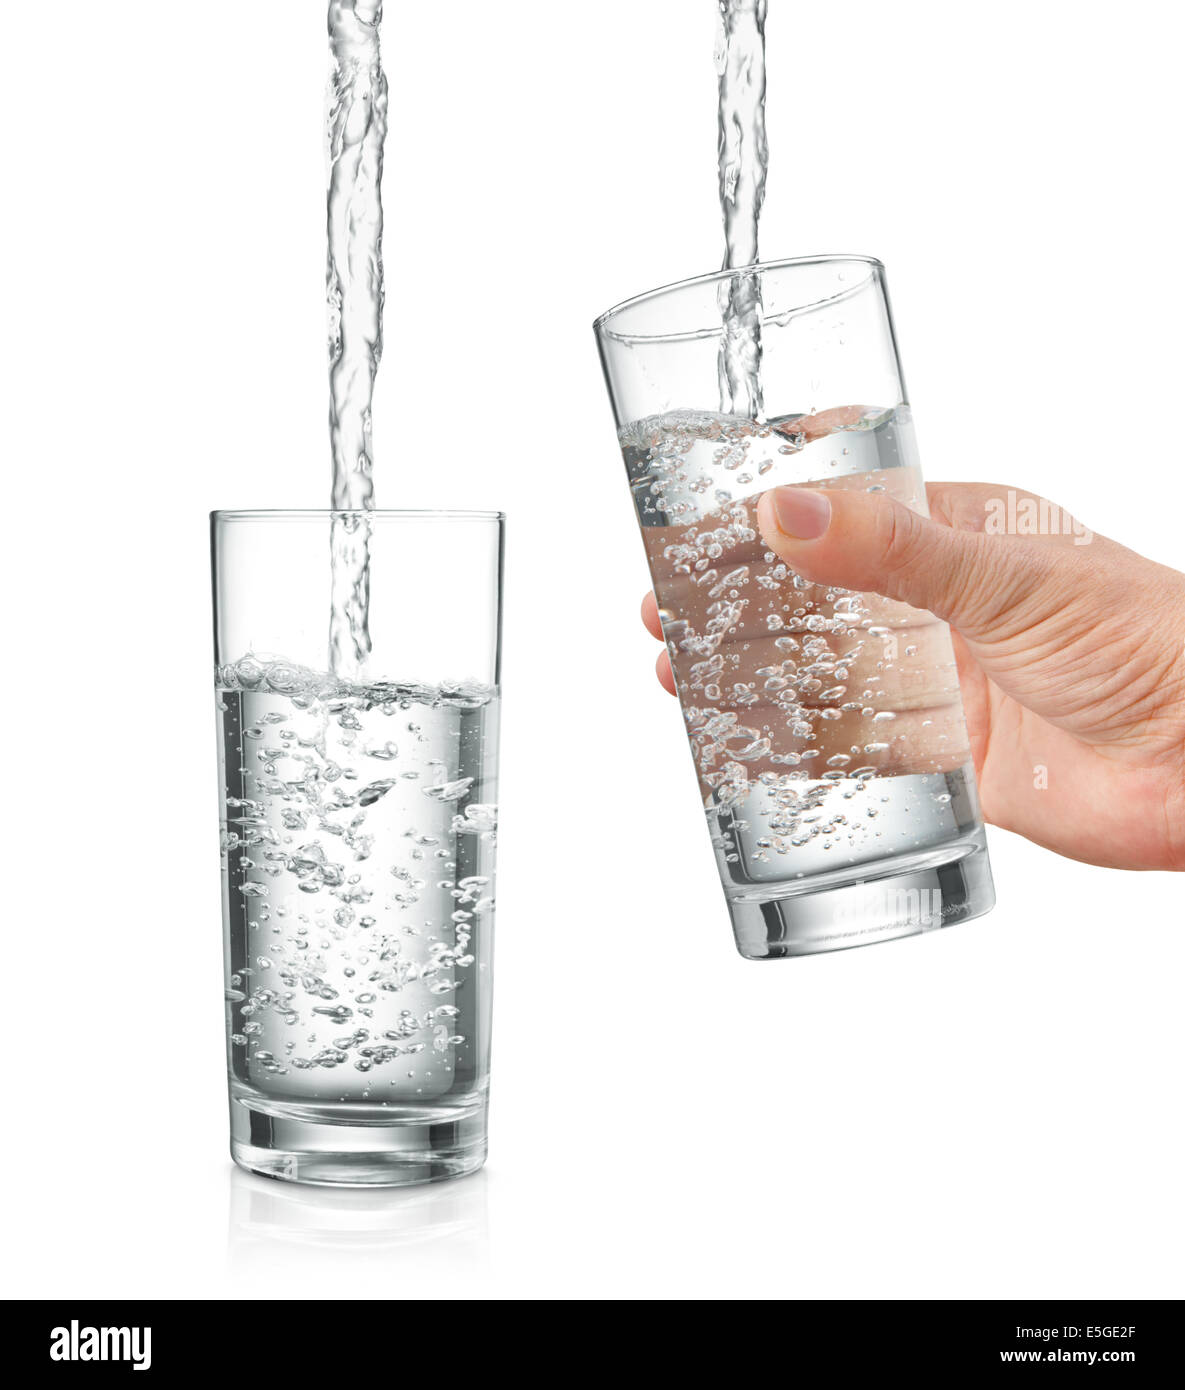 filling water into glass, with and without hand holding it Stock Photo